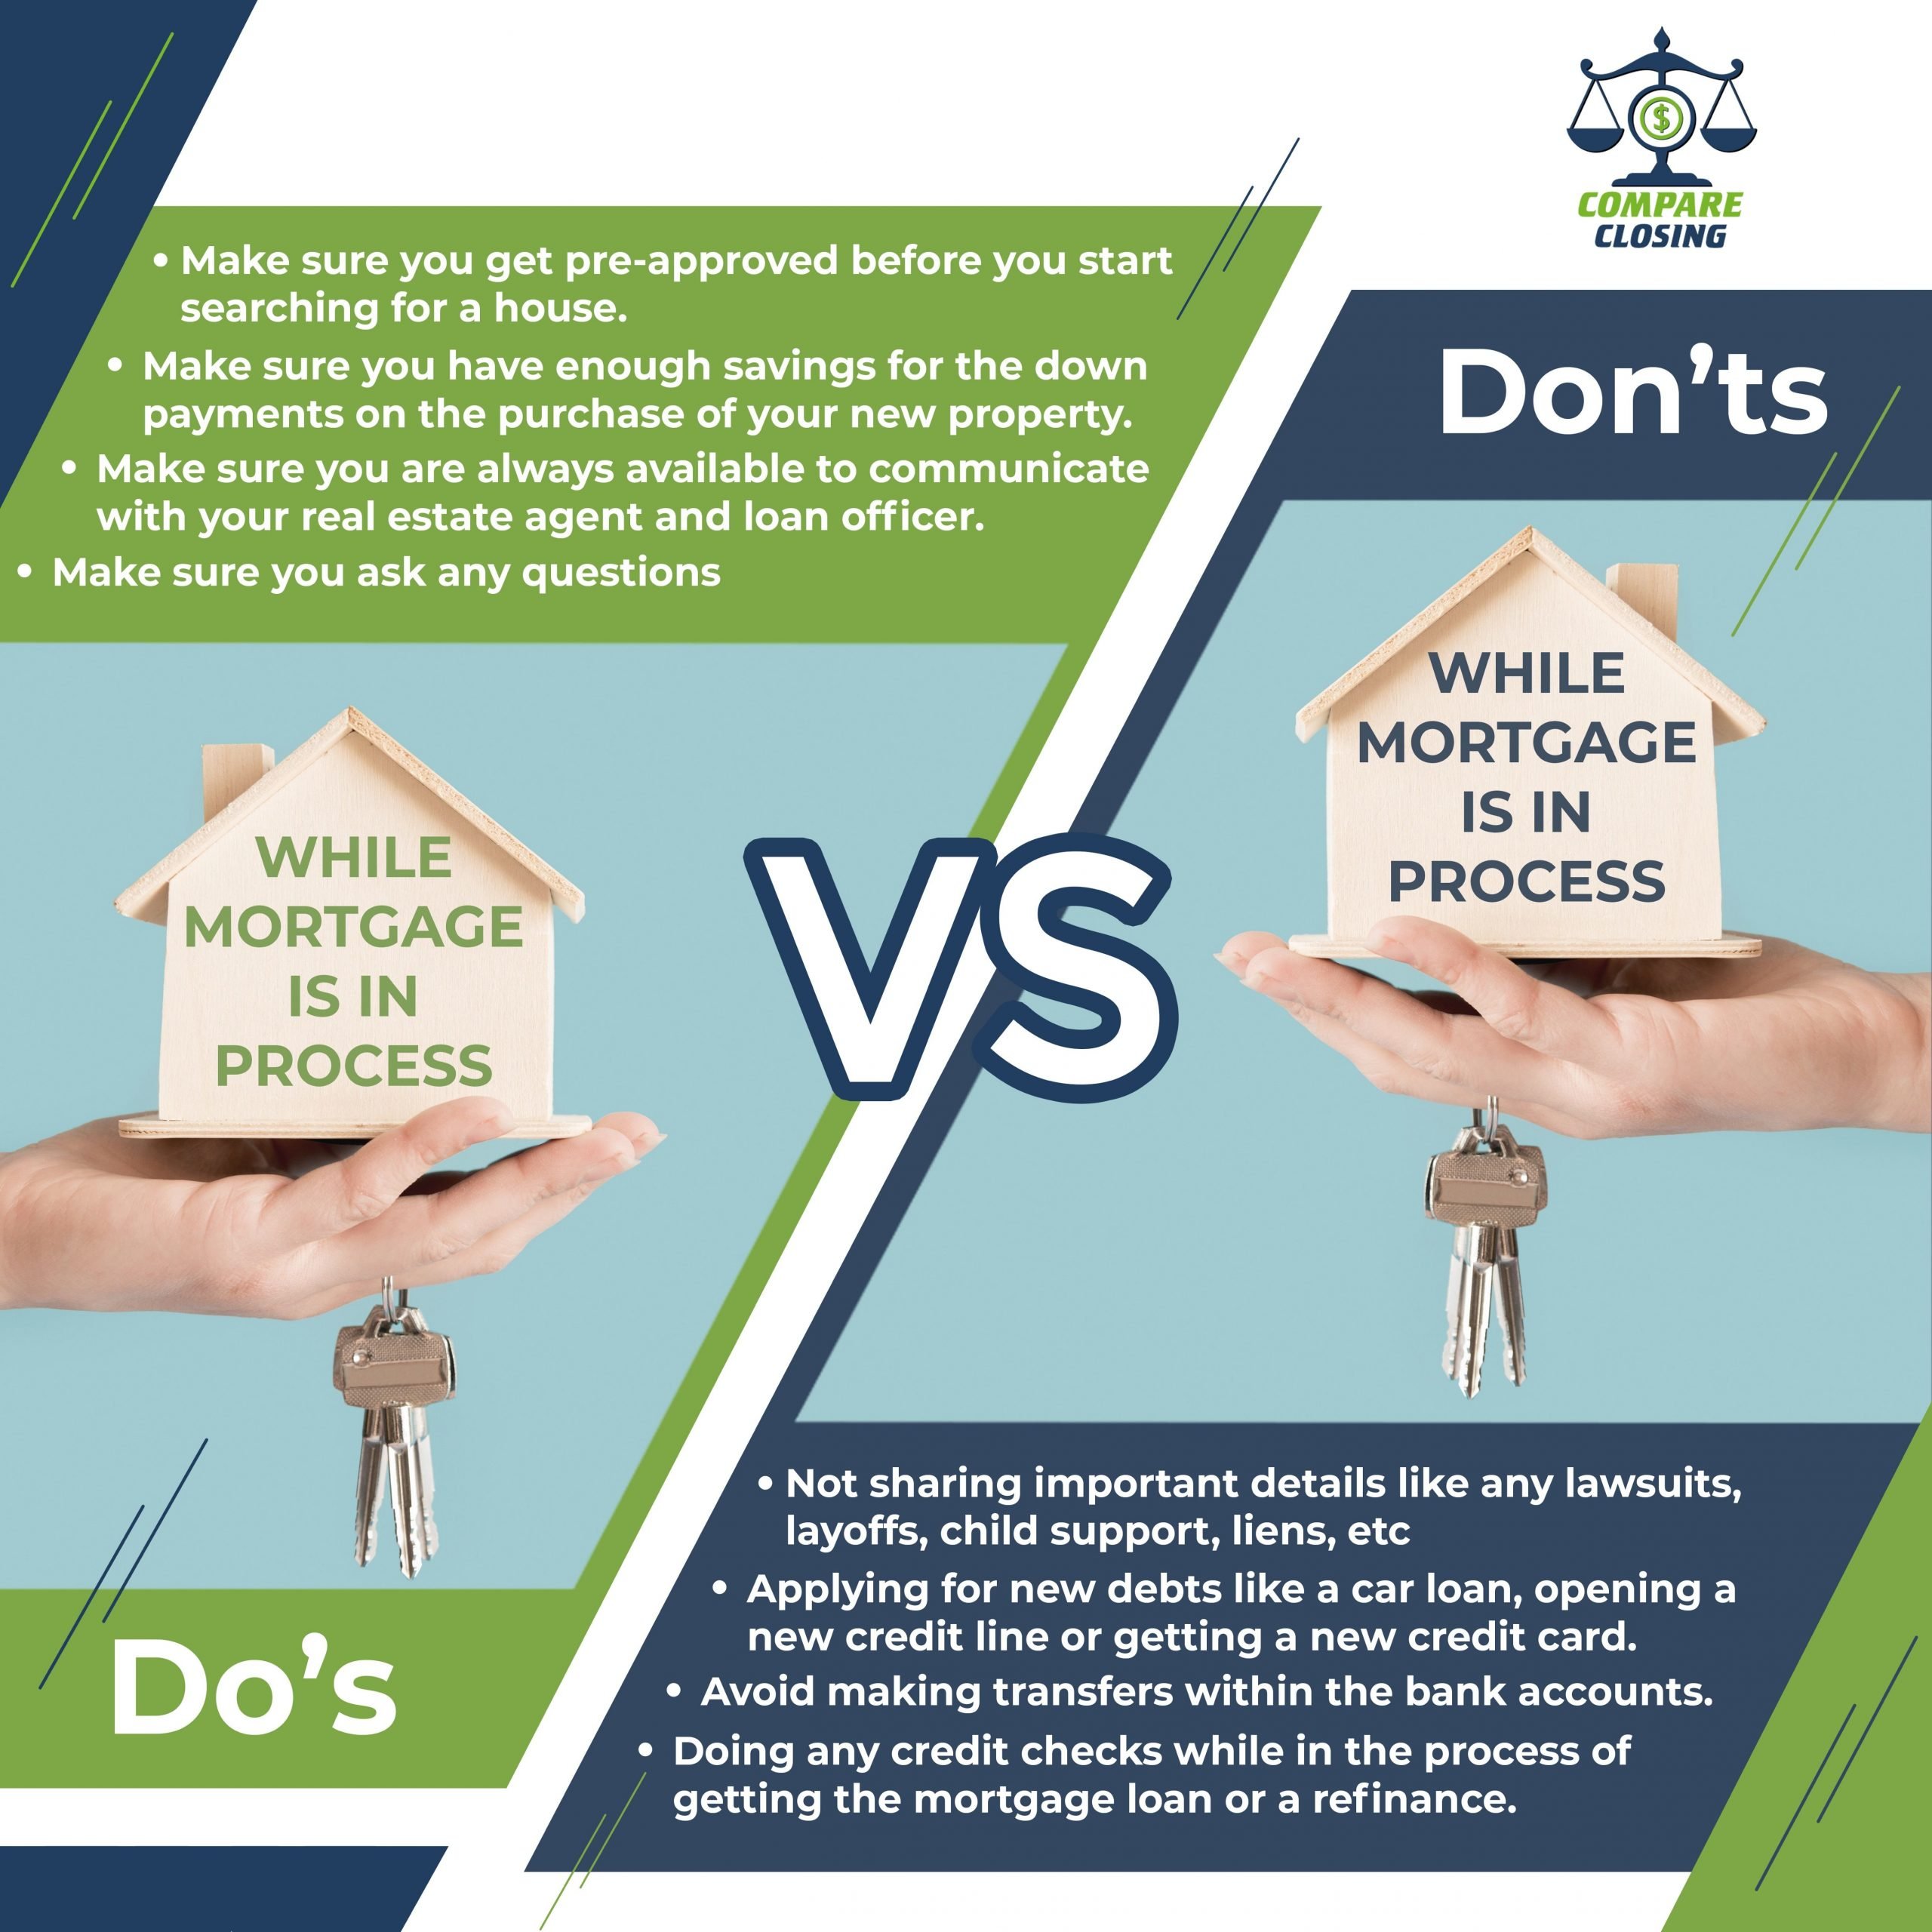 Here are some of the Doâs and Donâts while your mortgage ...